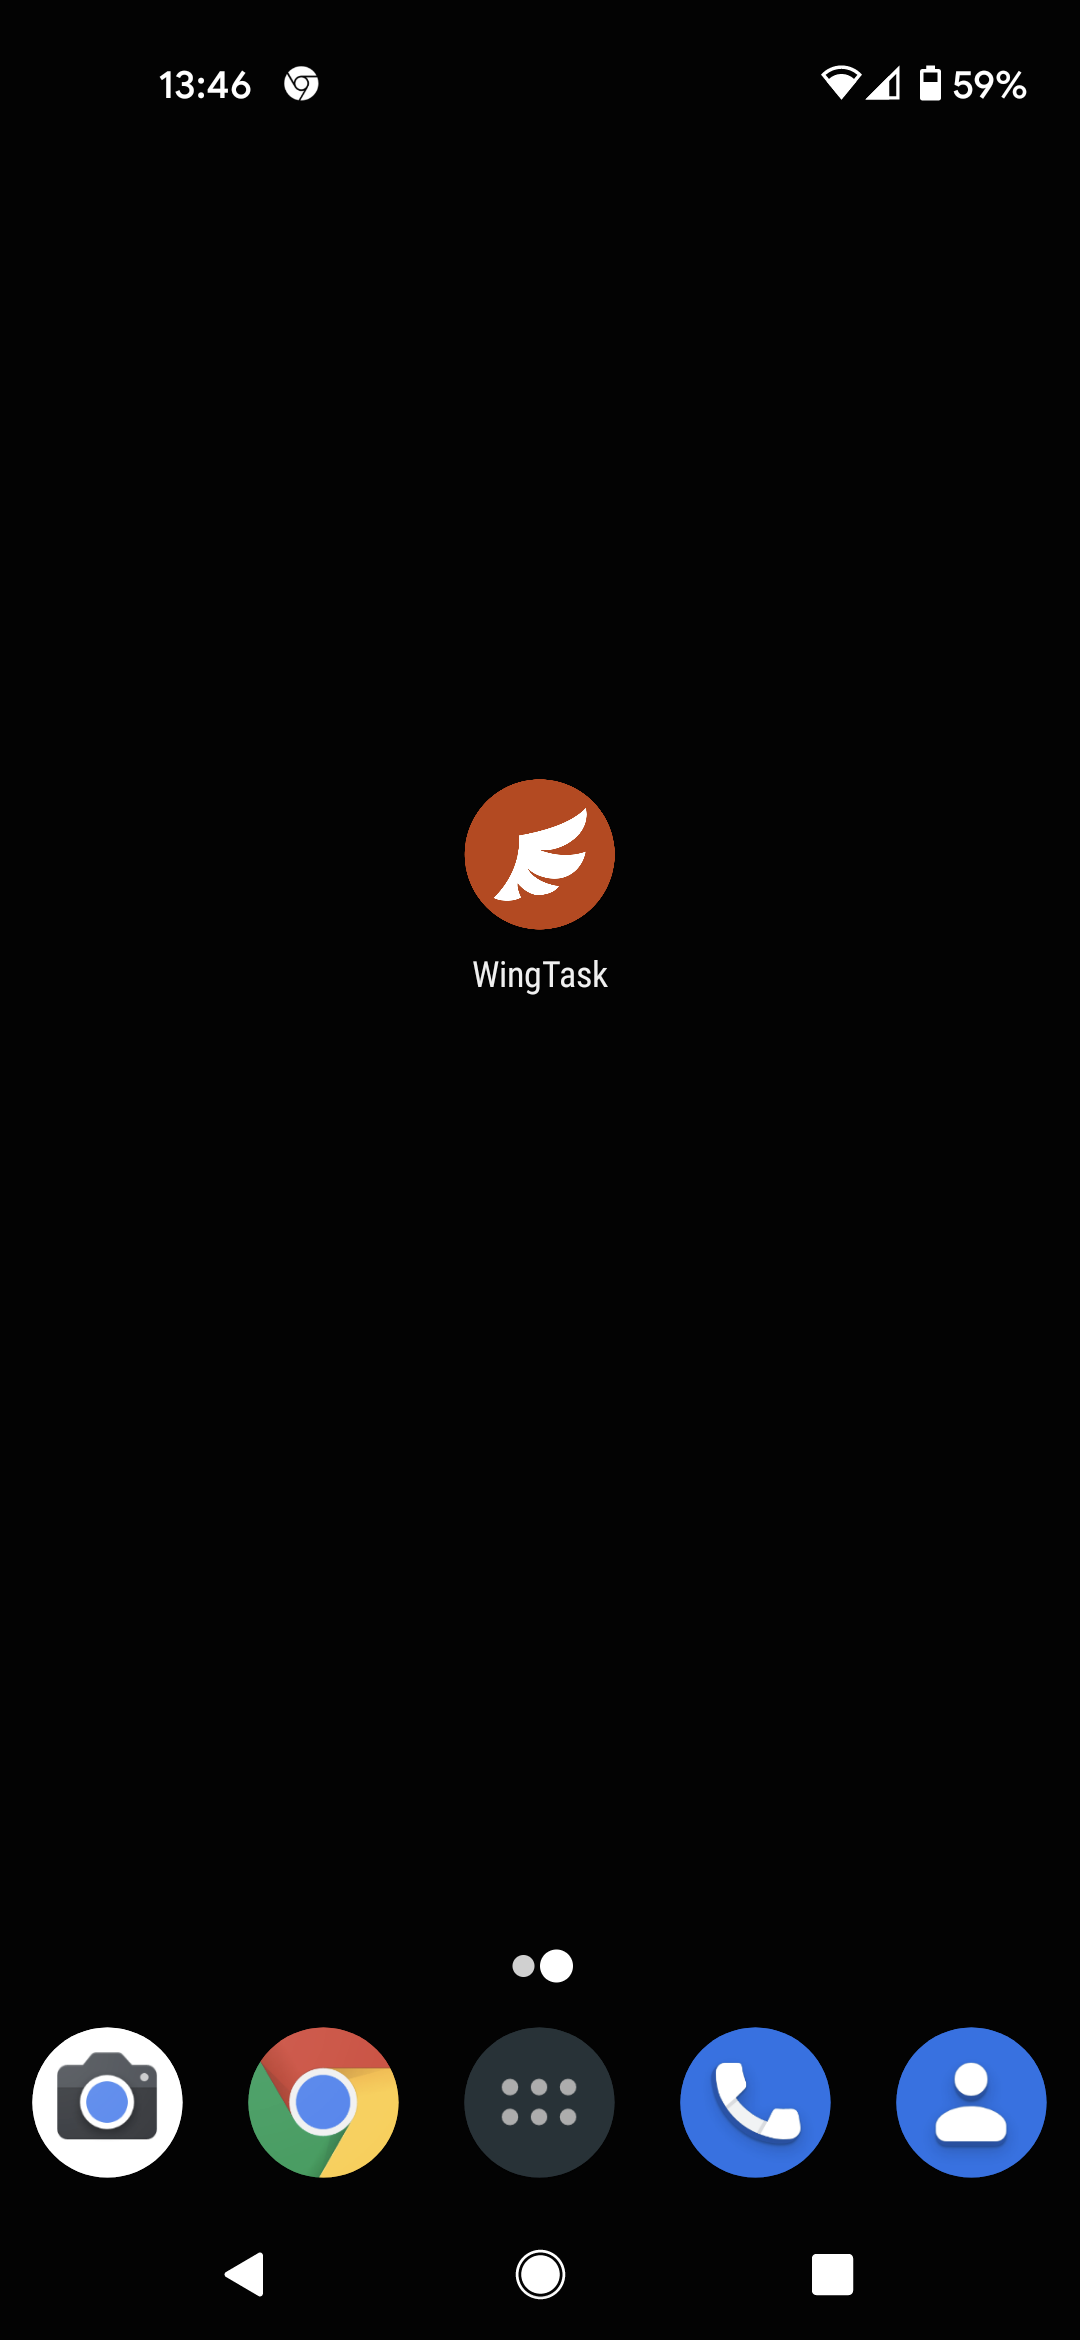 WingTask App icon on Home screen